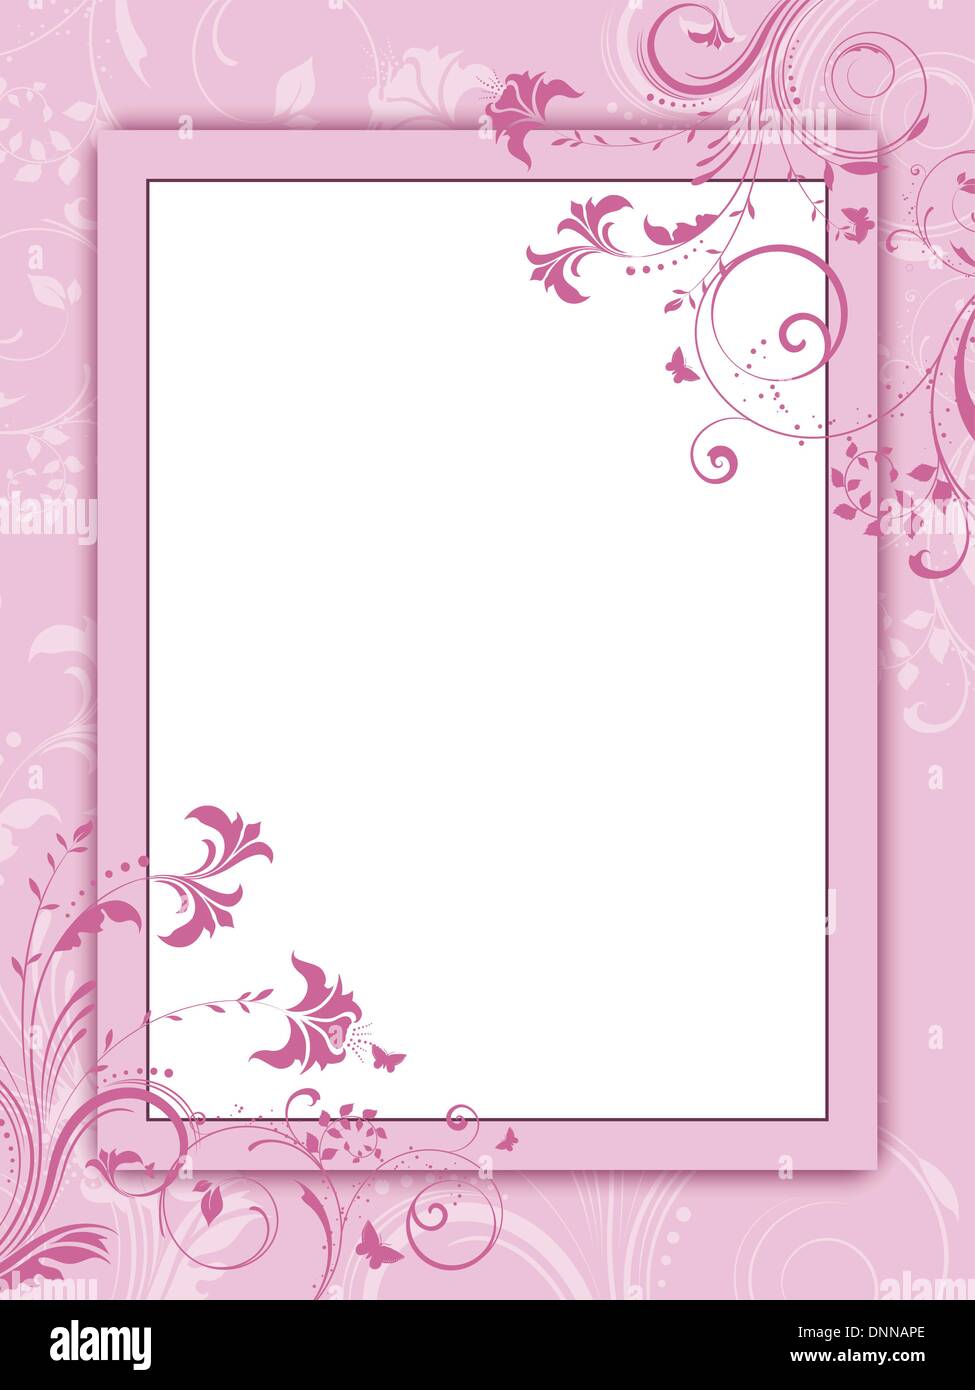 Decorative floral background in shades of pink Stock Vector